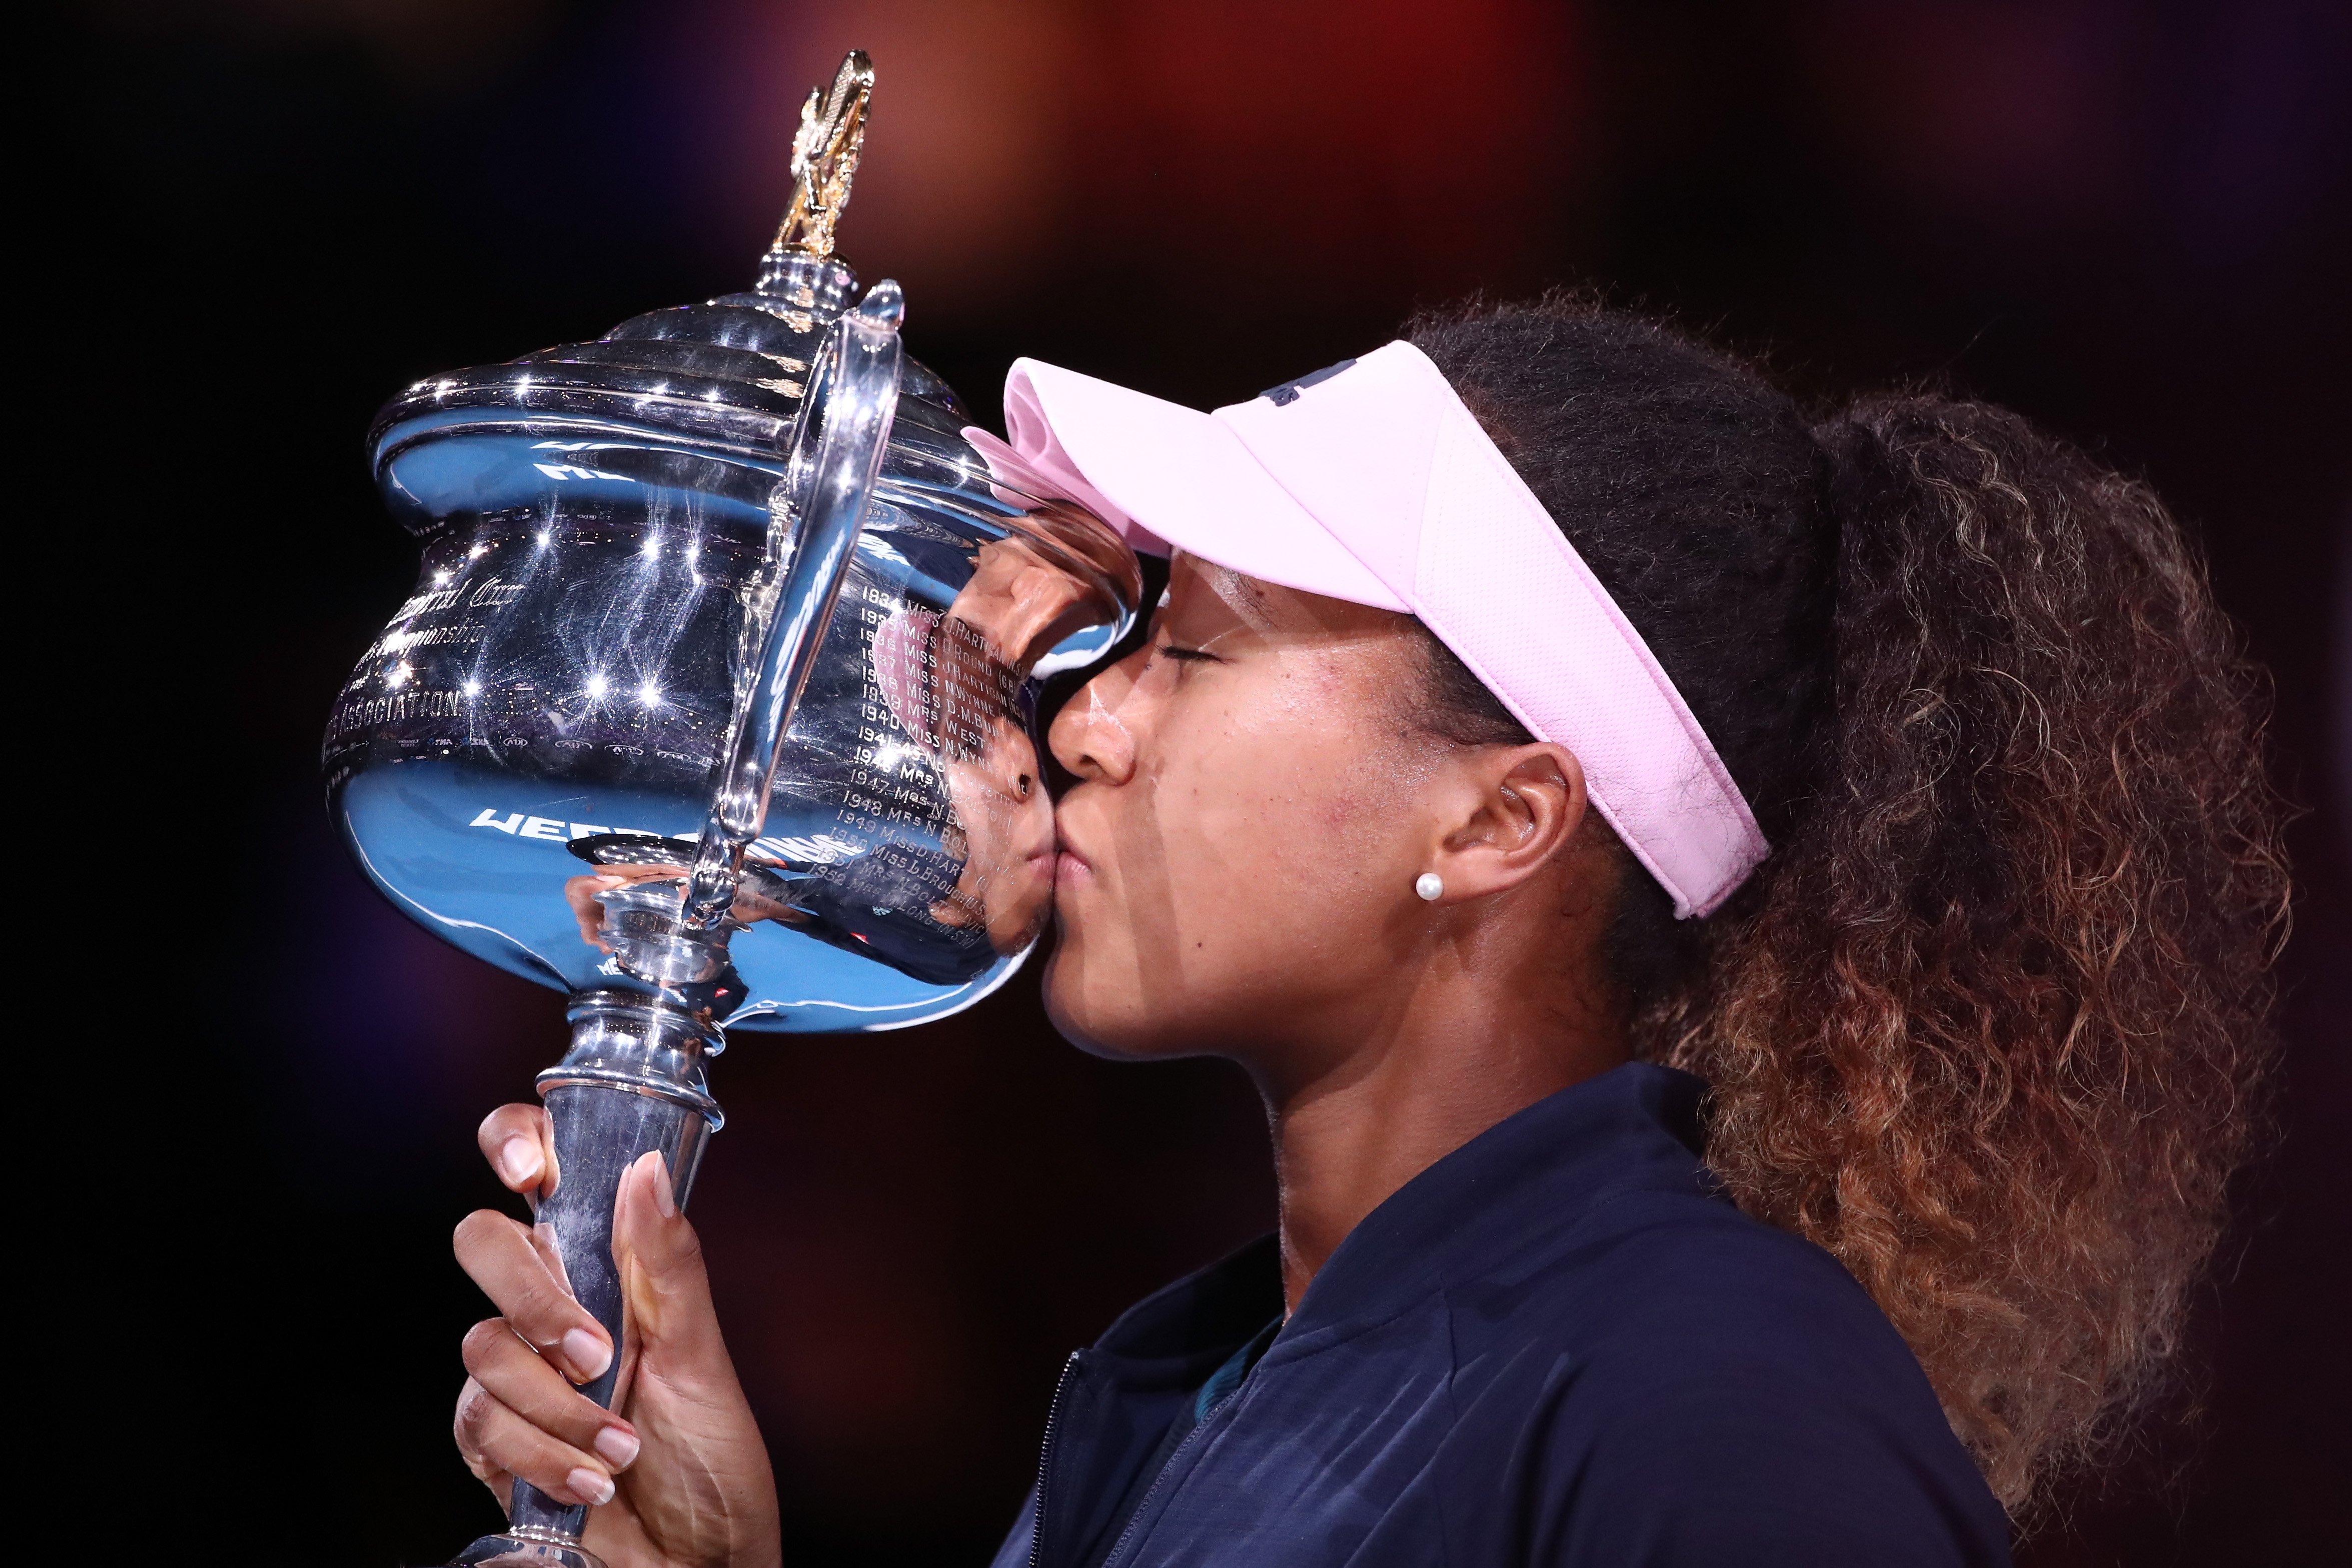 Naomi Osaka kissing her trophy after winning the Women's Singles Final during the 2019 Australian Open. | Photo: Getty Images